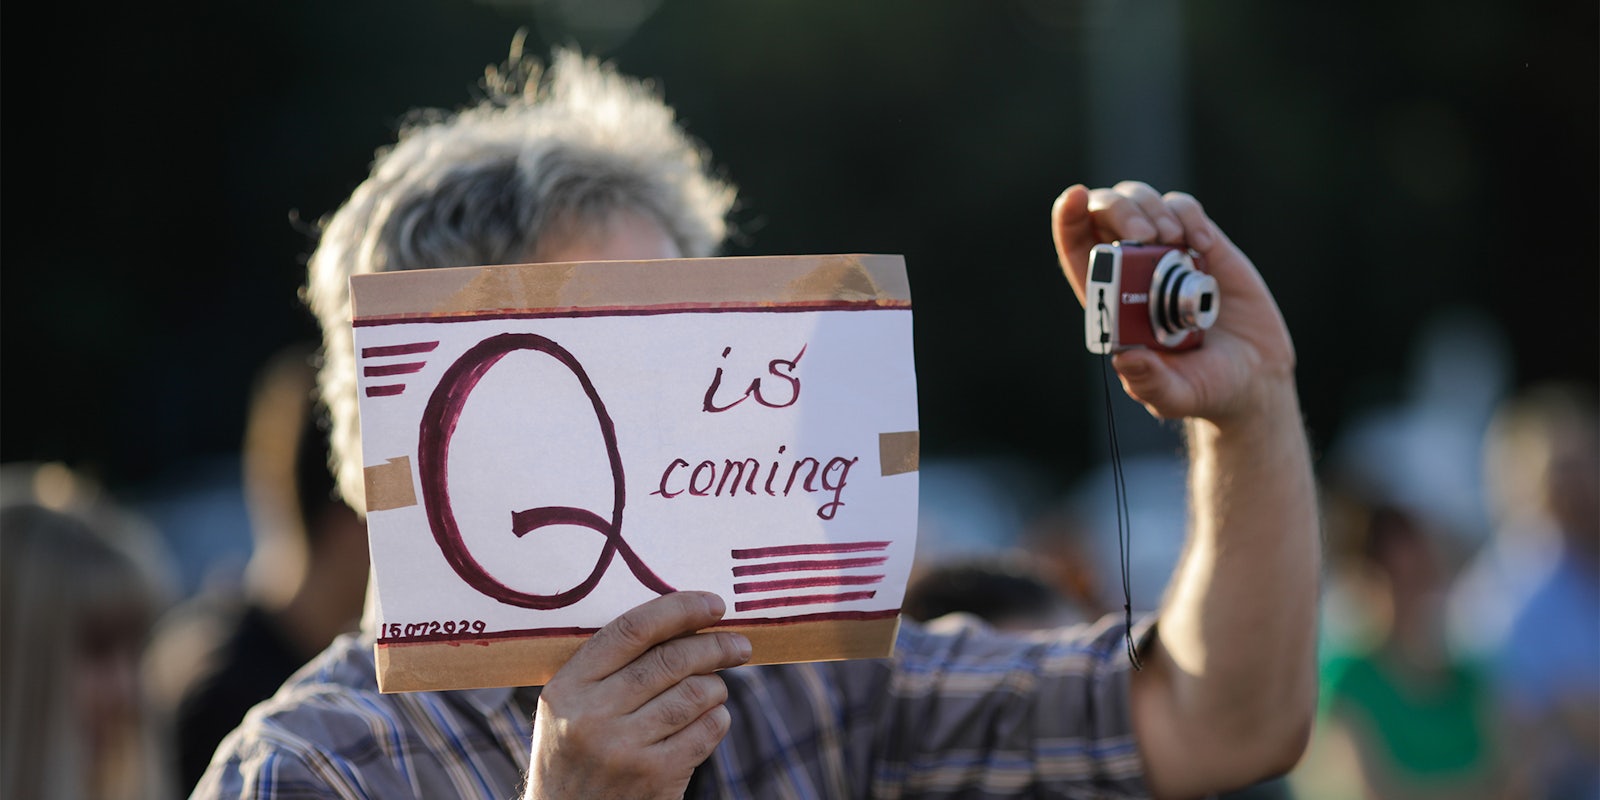 man holding camera and 'q is coming' sign